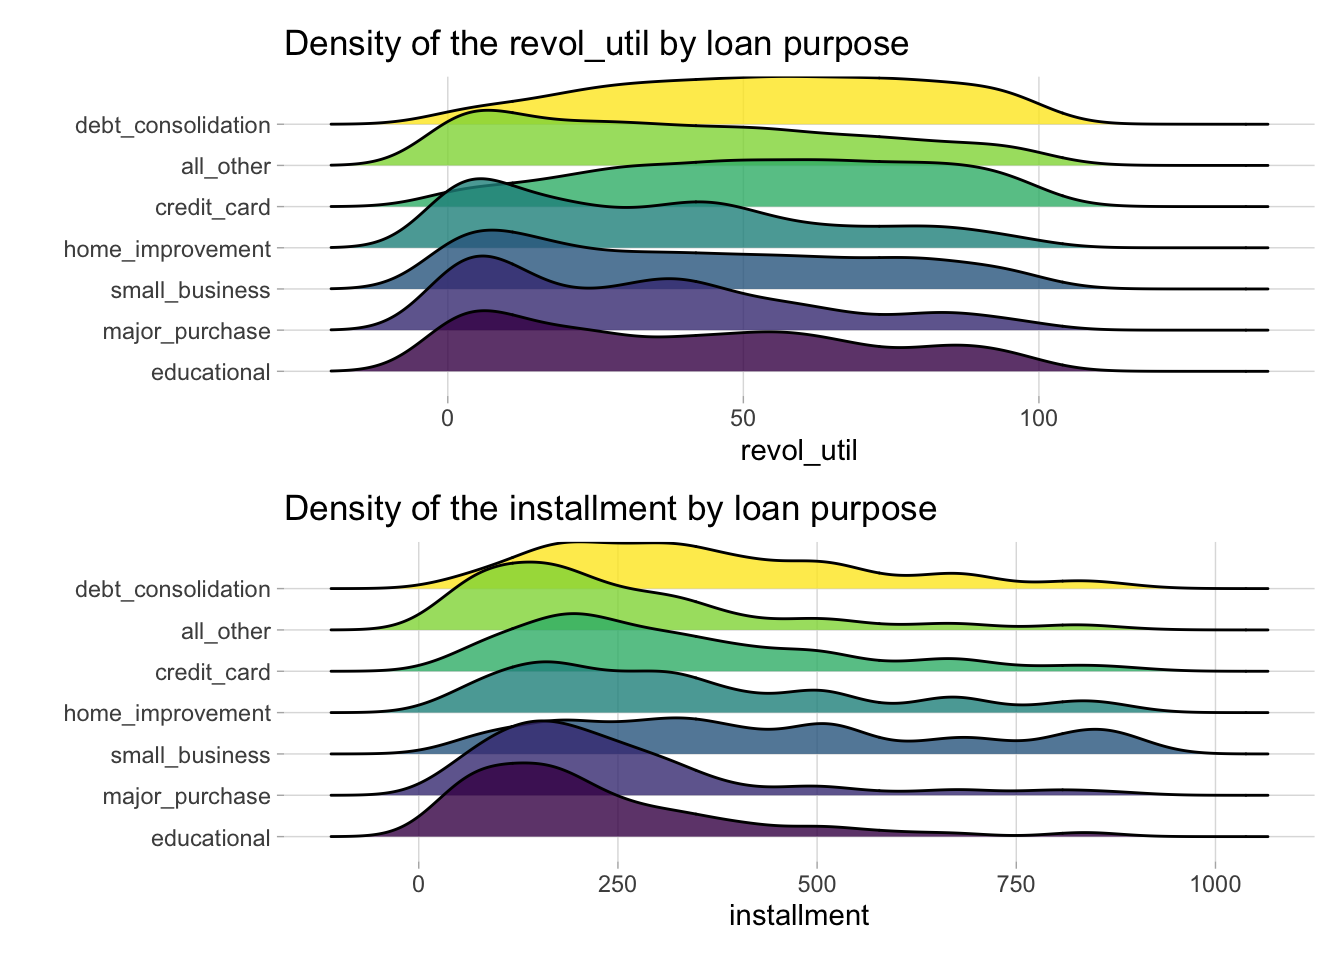 Density plots of revolving line utilization rate and installment variables across loan types